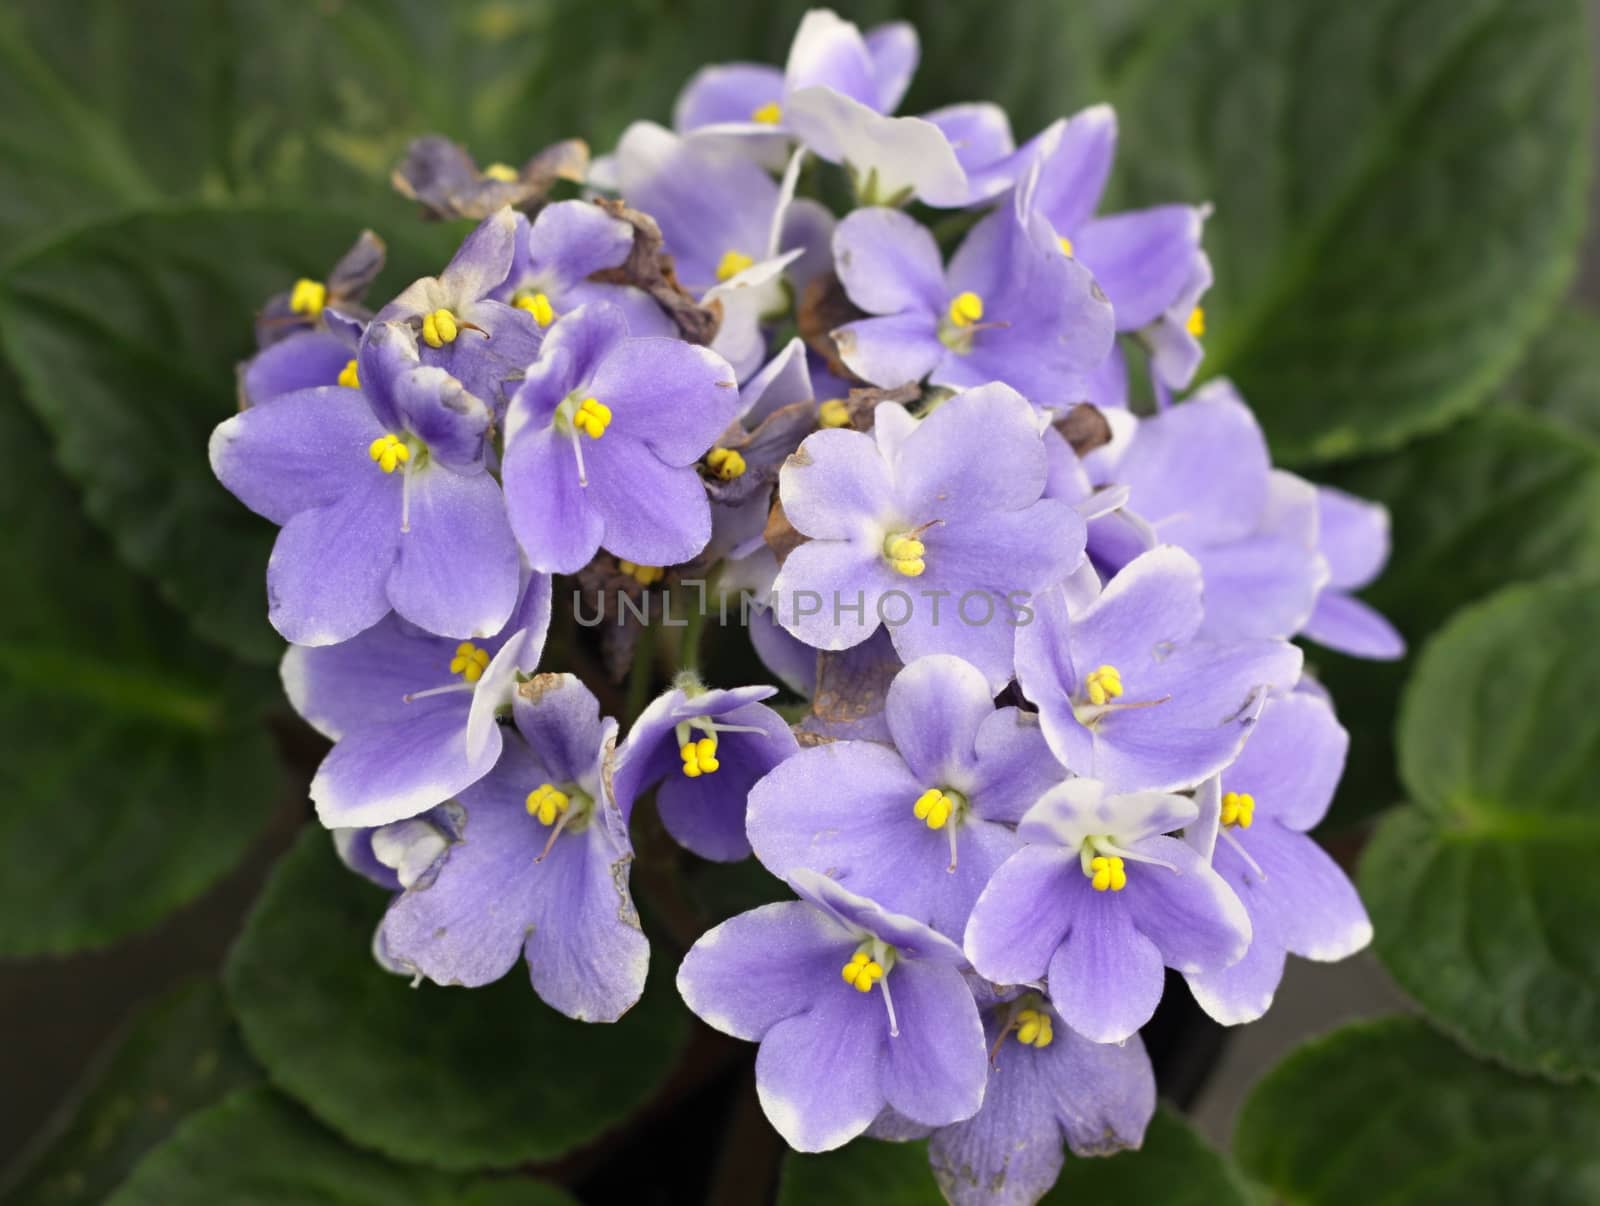 the flowers of violets and green leaves